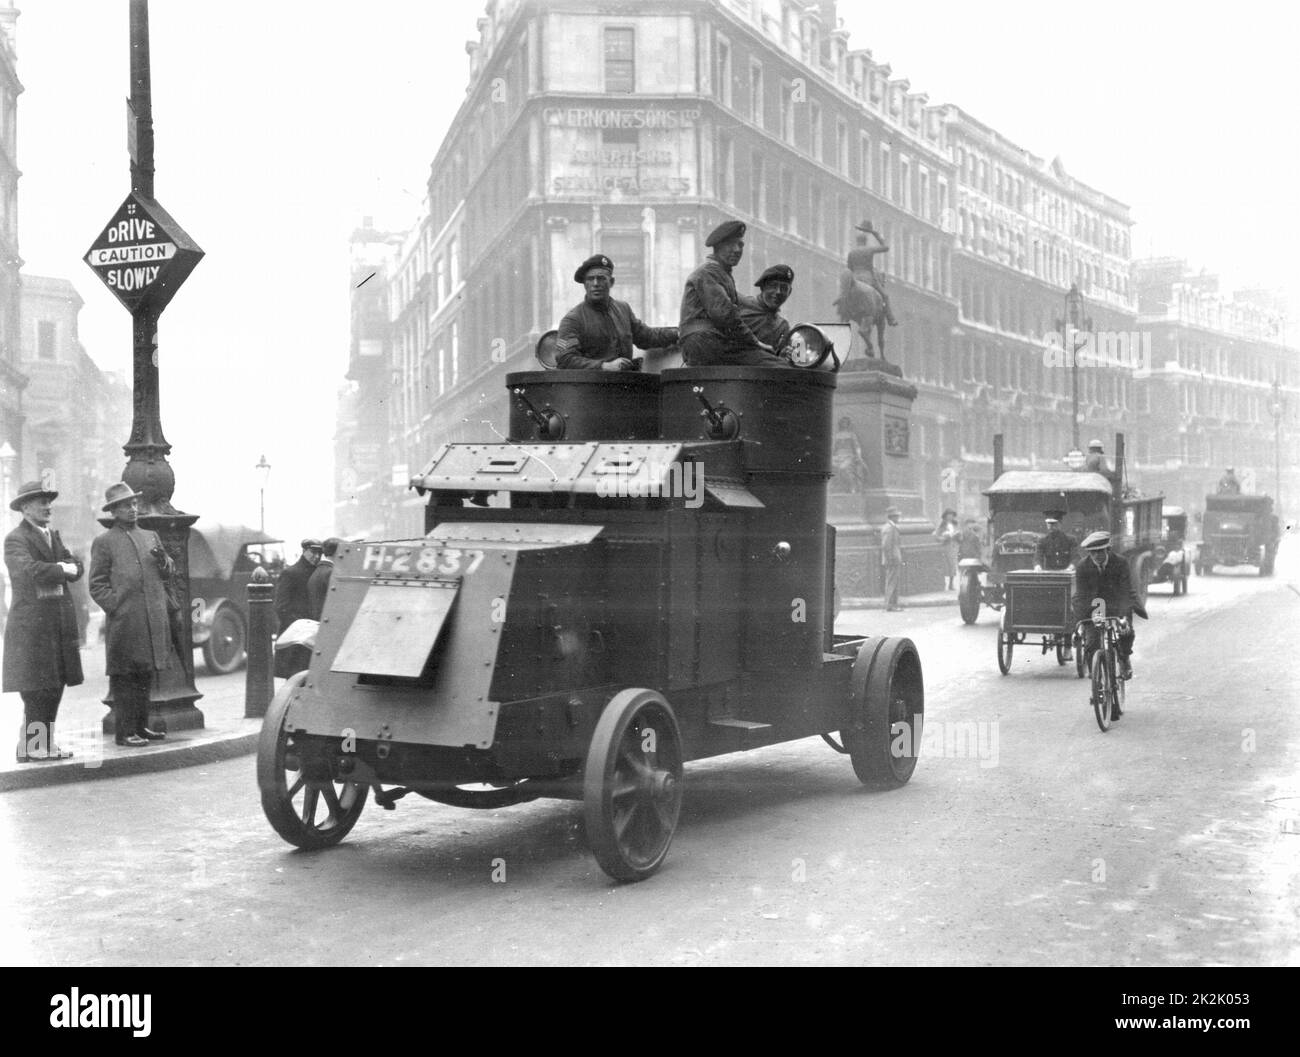 General Strike, Britain, 1926. Food convoy being escorted along Holborn,  London, by troops in armoured cars. Photograph. Stock Photo